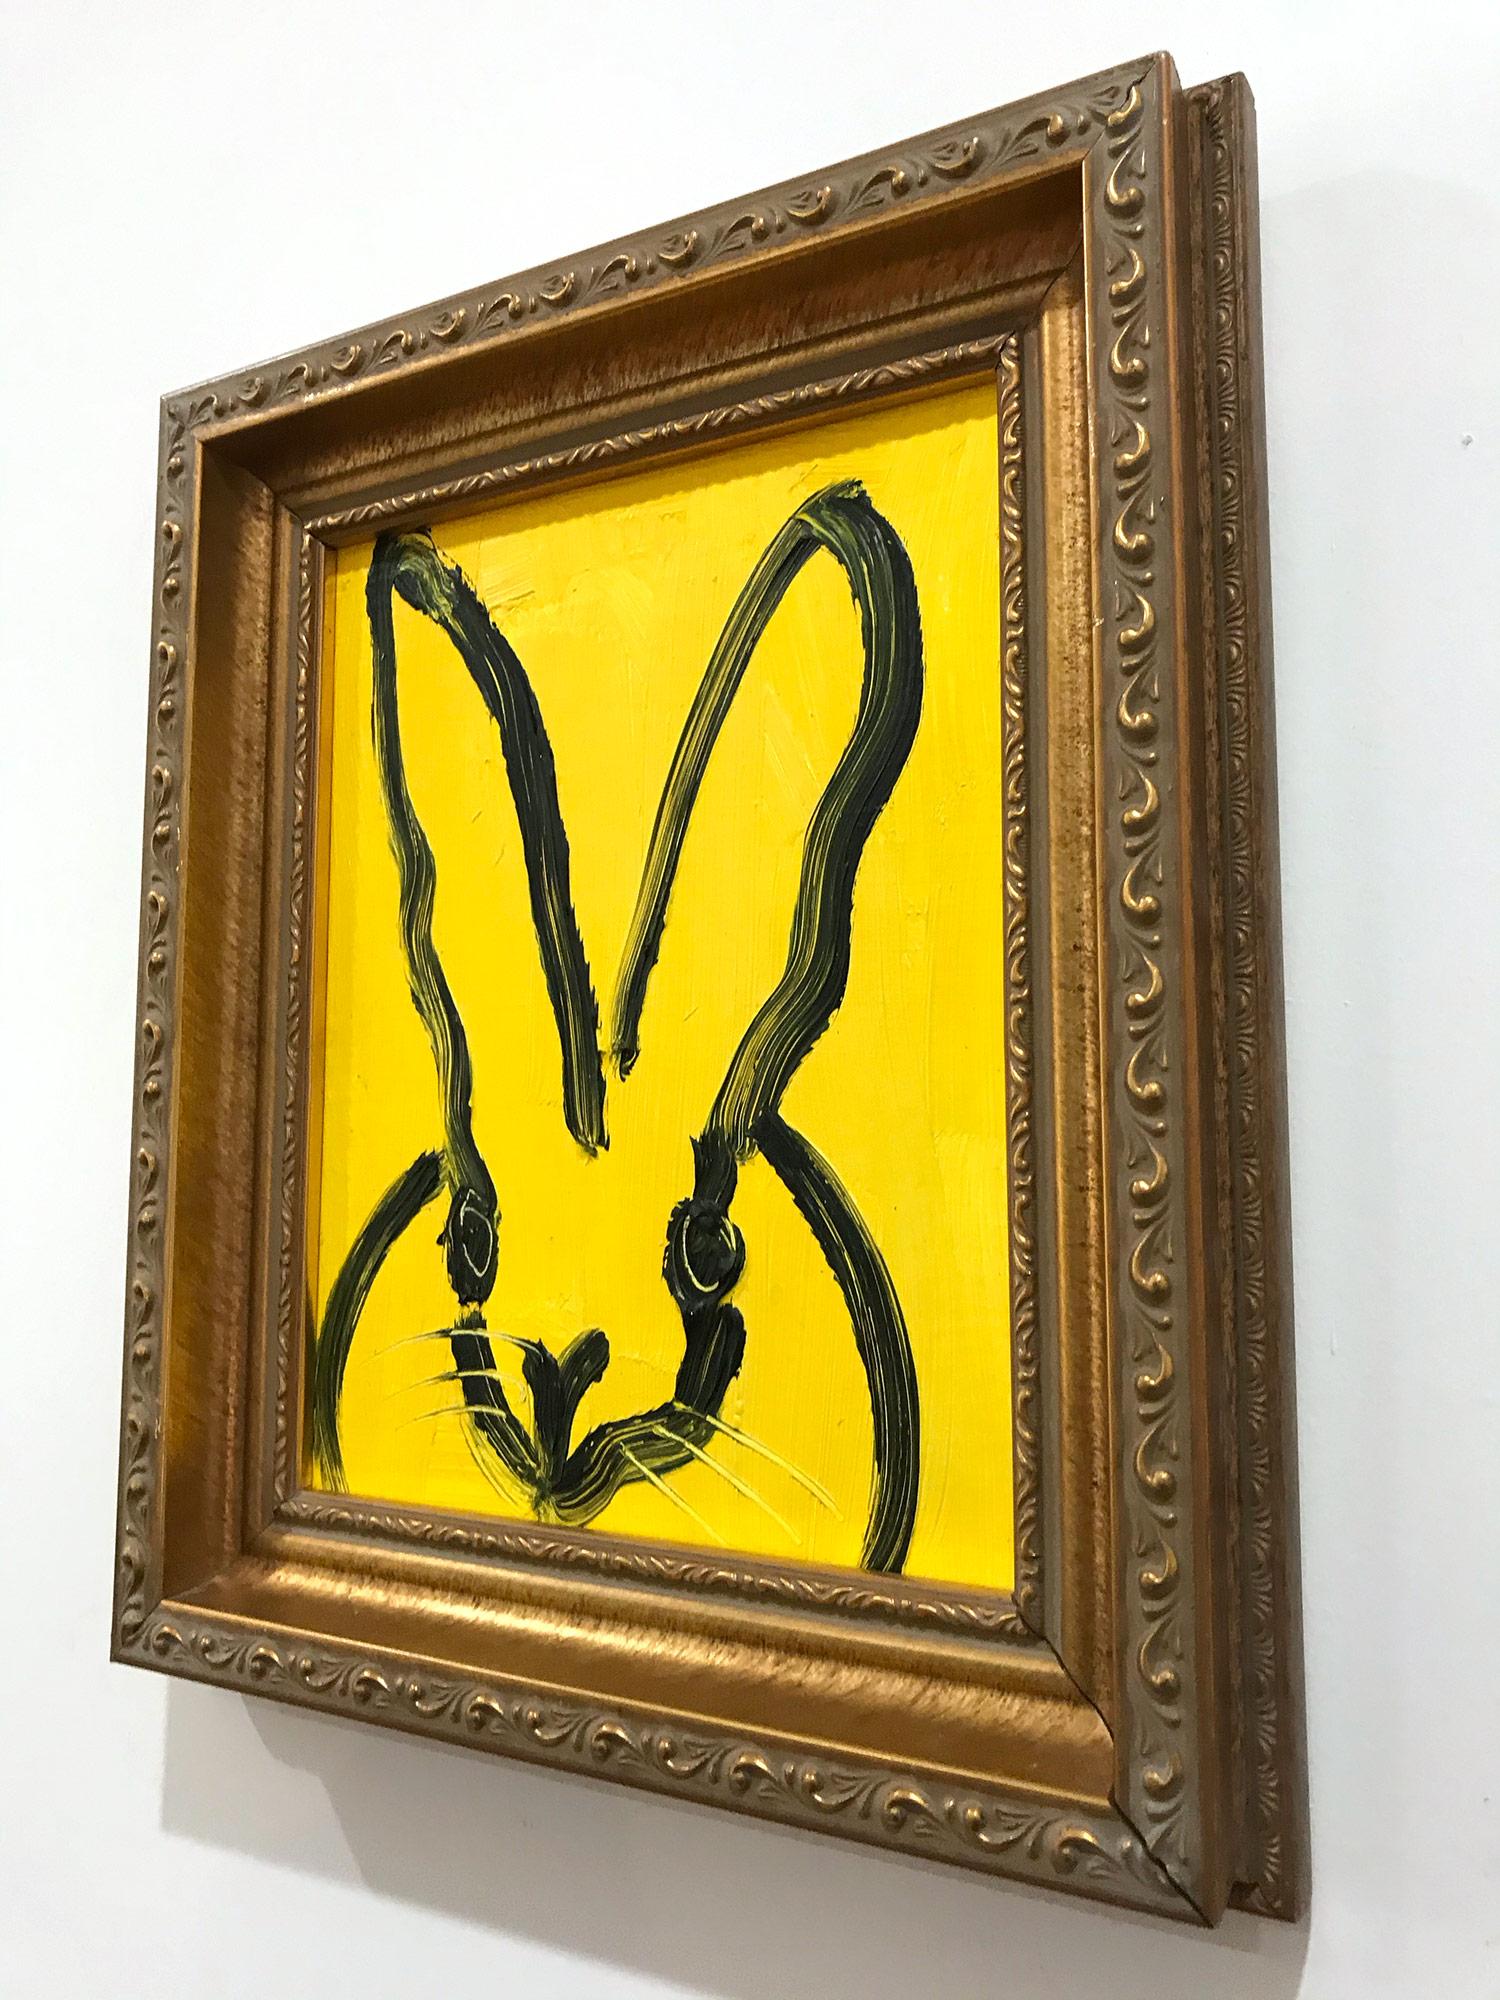 A wonderful composition of one of Slonem's most iconic subjects, Bunnies. This piece depicts a gestural figure of a black bunny on a royal yellow background with thick use of paint. It is housed in a wonderful antique style frame. Inspired by nature